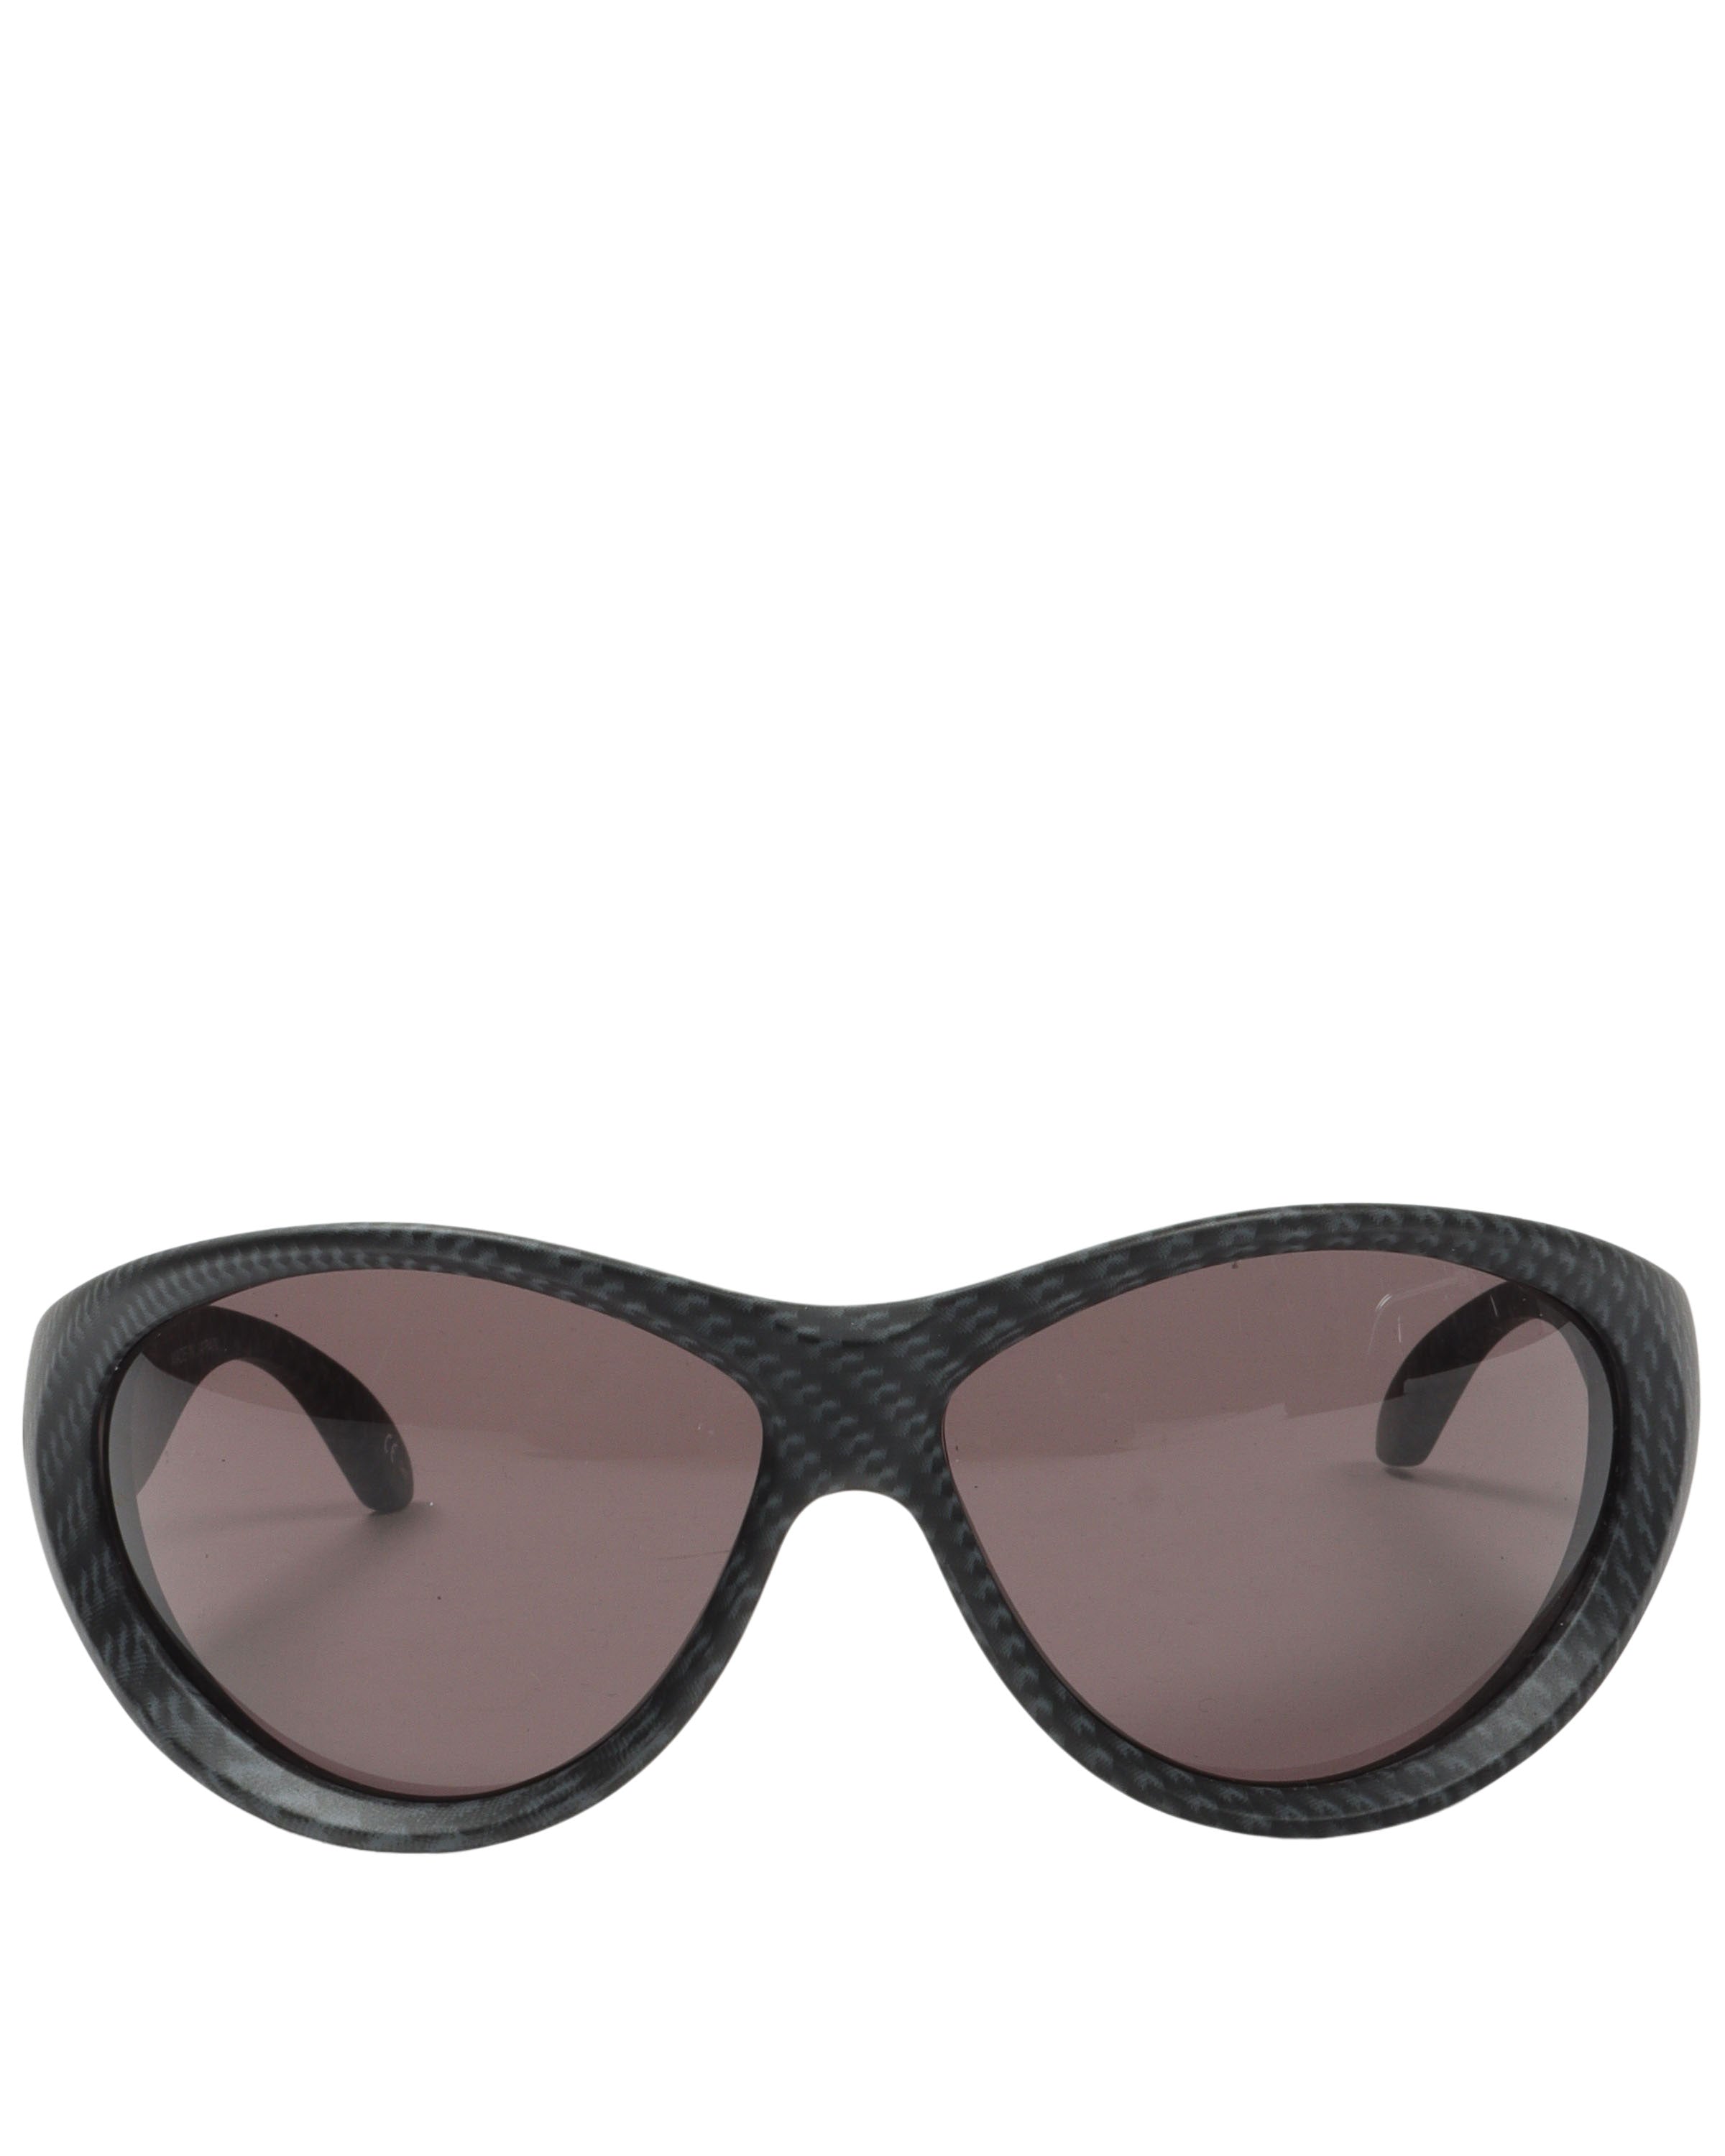 SWIFT ROUND SUNGLASSES IN CARBON